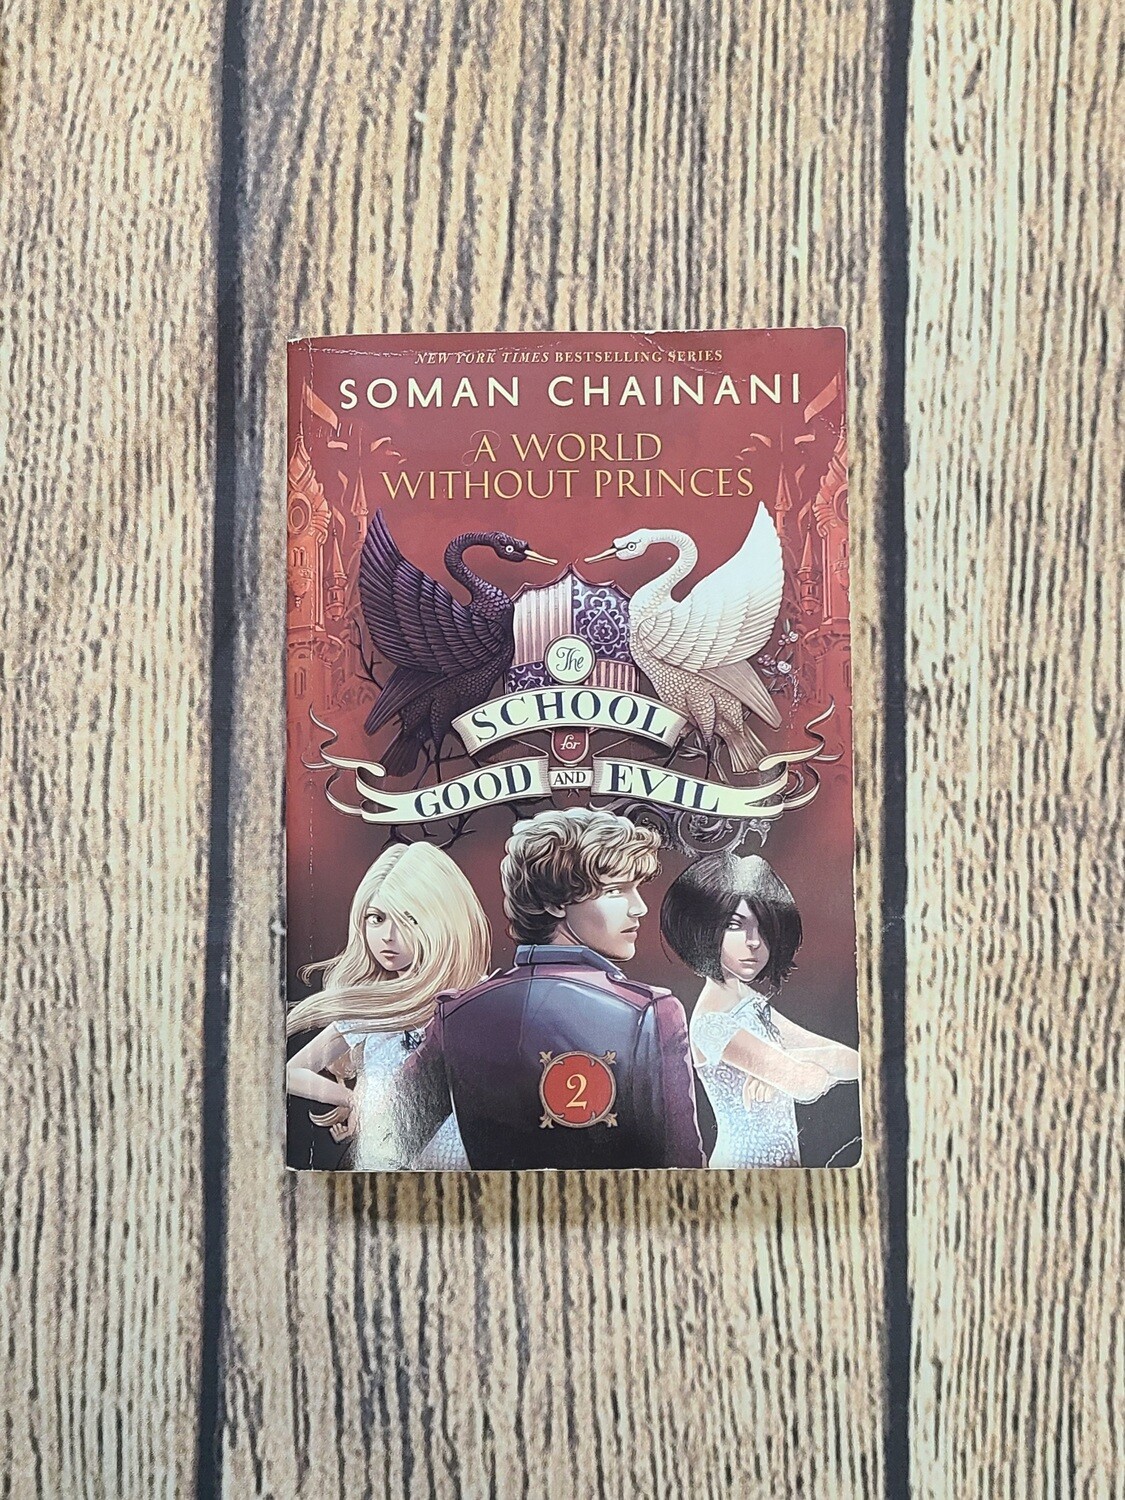 The School for Good and Evil: A World Without Princes by Soman Chainani